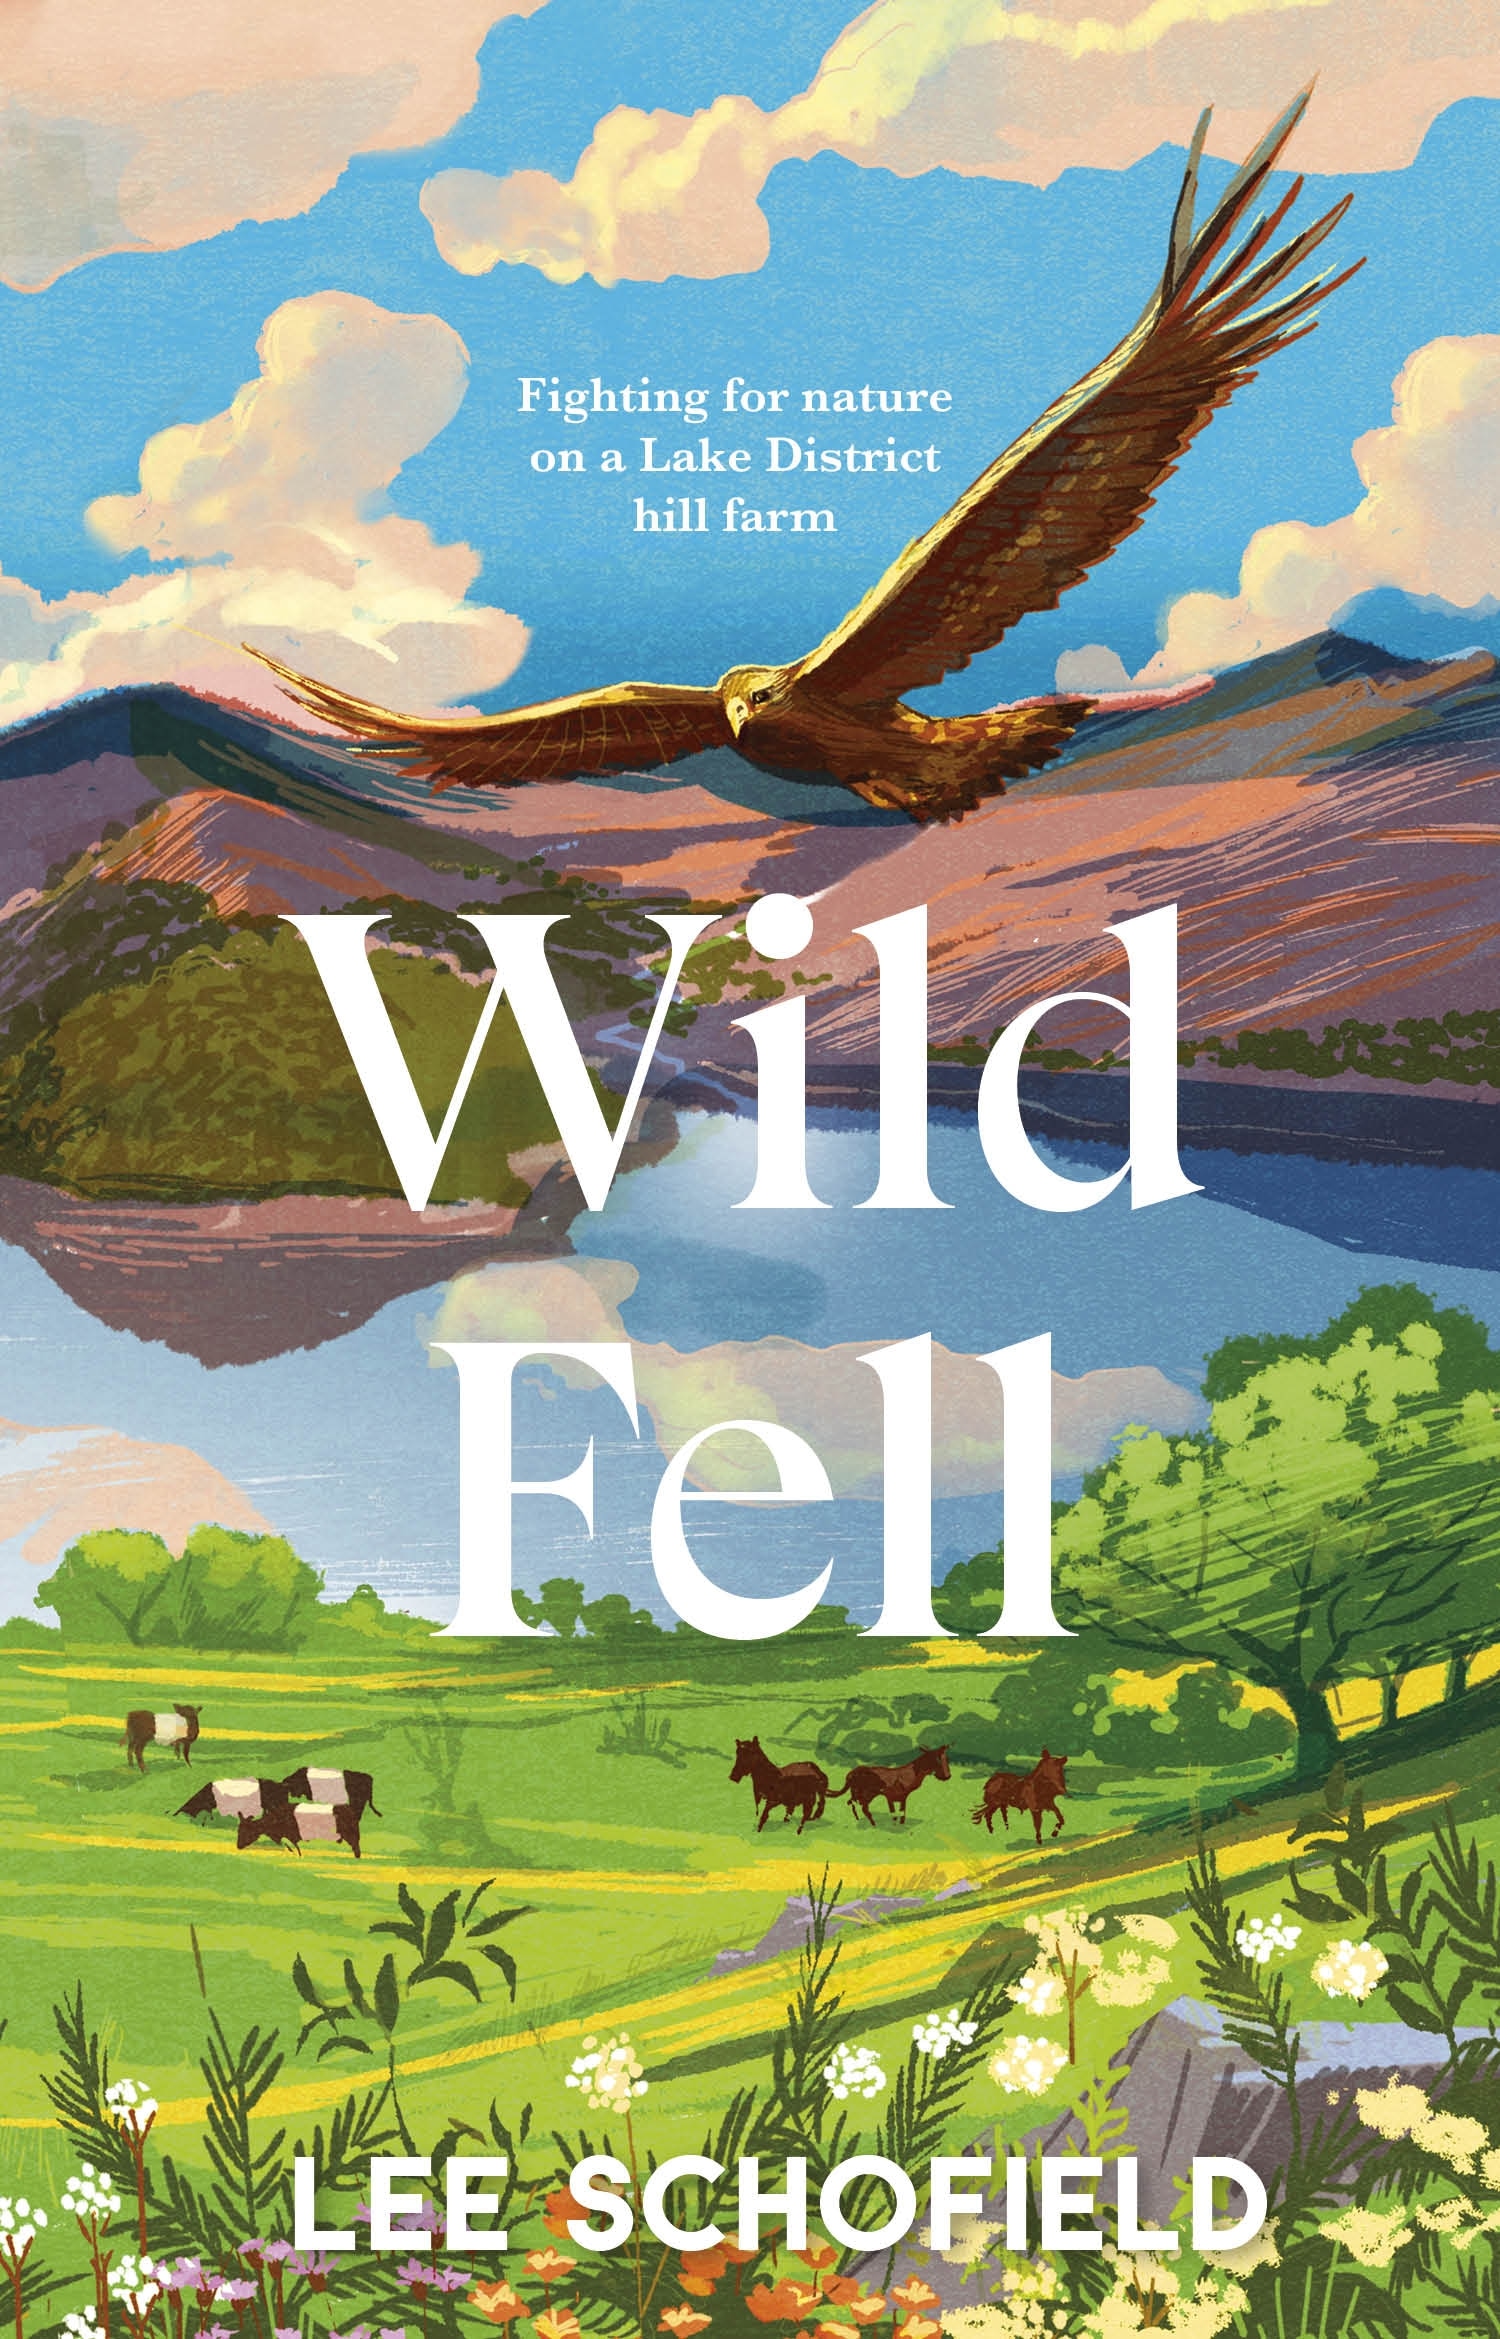 Book “Wild Fell” by Lee Schofield — February 24, 2022